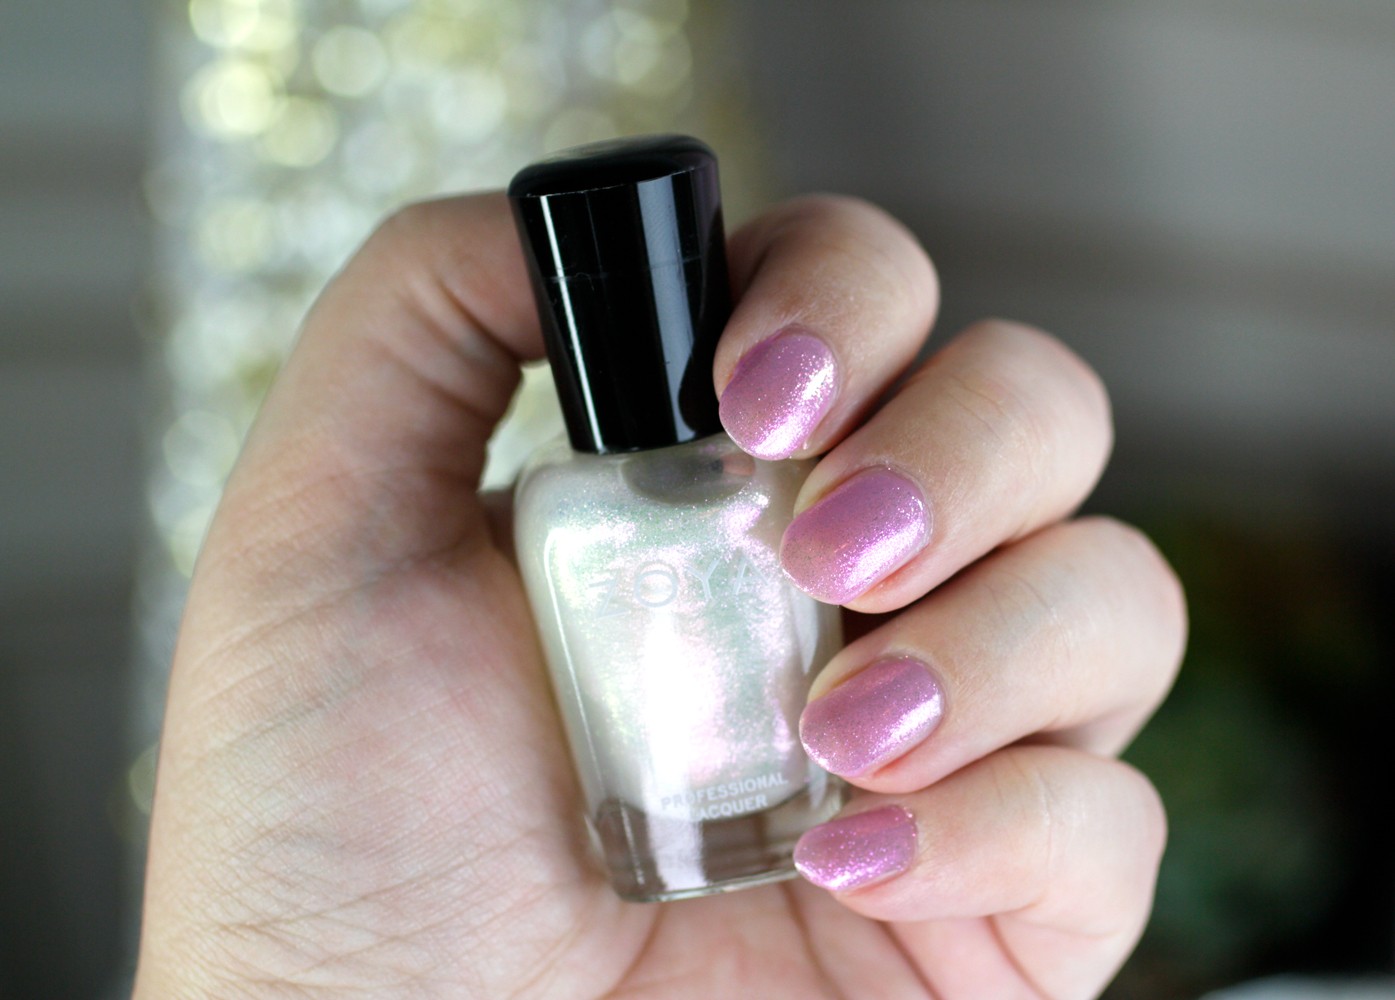 Zoya Pastel Lavender Jelly Polish - Libby Topped with Leia - Zoya Nail Polish Review: Kisses Pastel Jellies Collection by LA cruelty free beauty blogger My Beauty Bunny